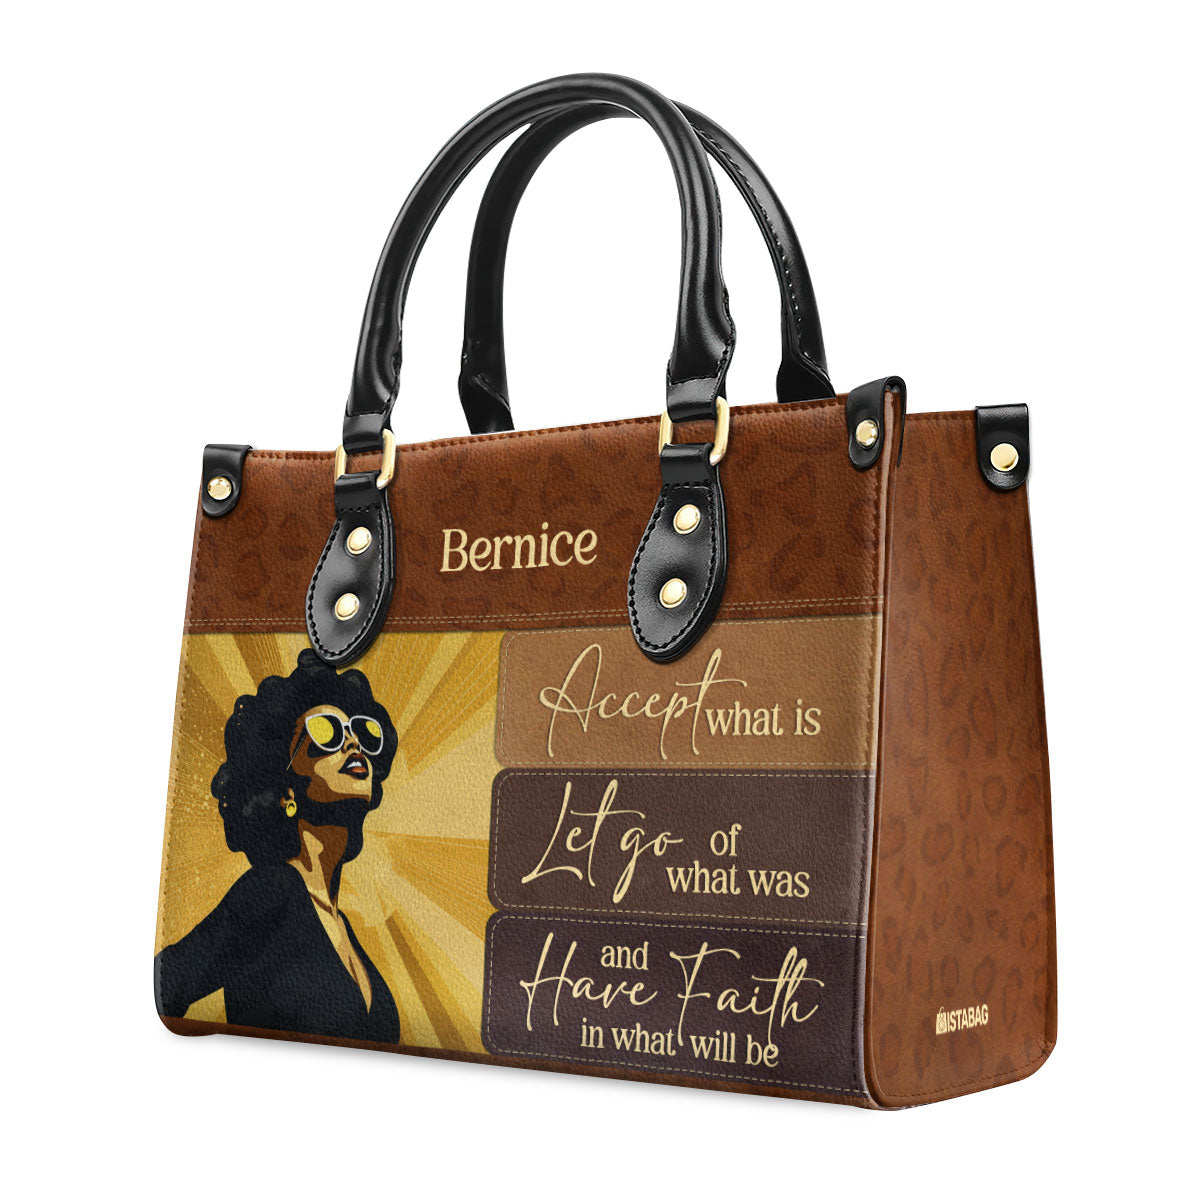 Have Faith In What Will Be - Personalized Leather Handbag STB13